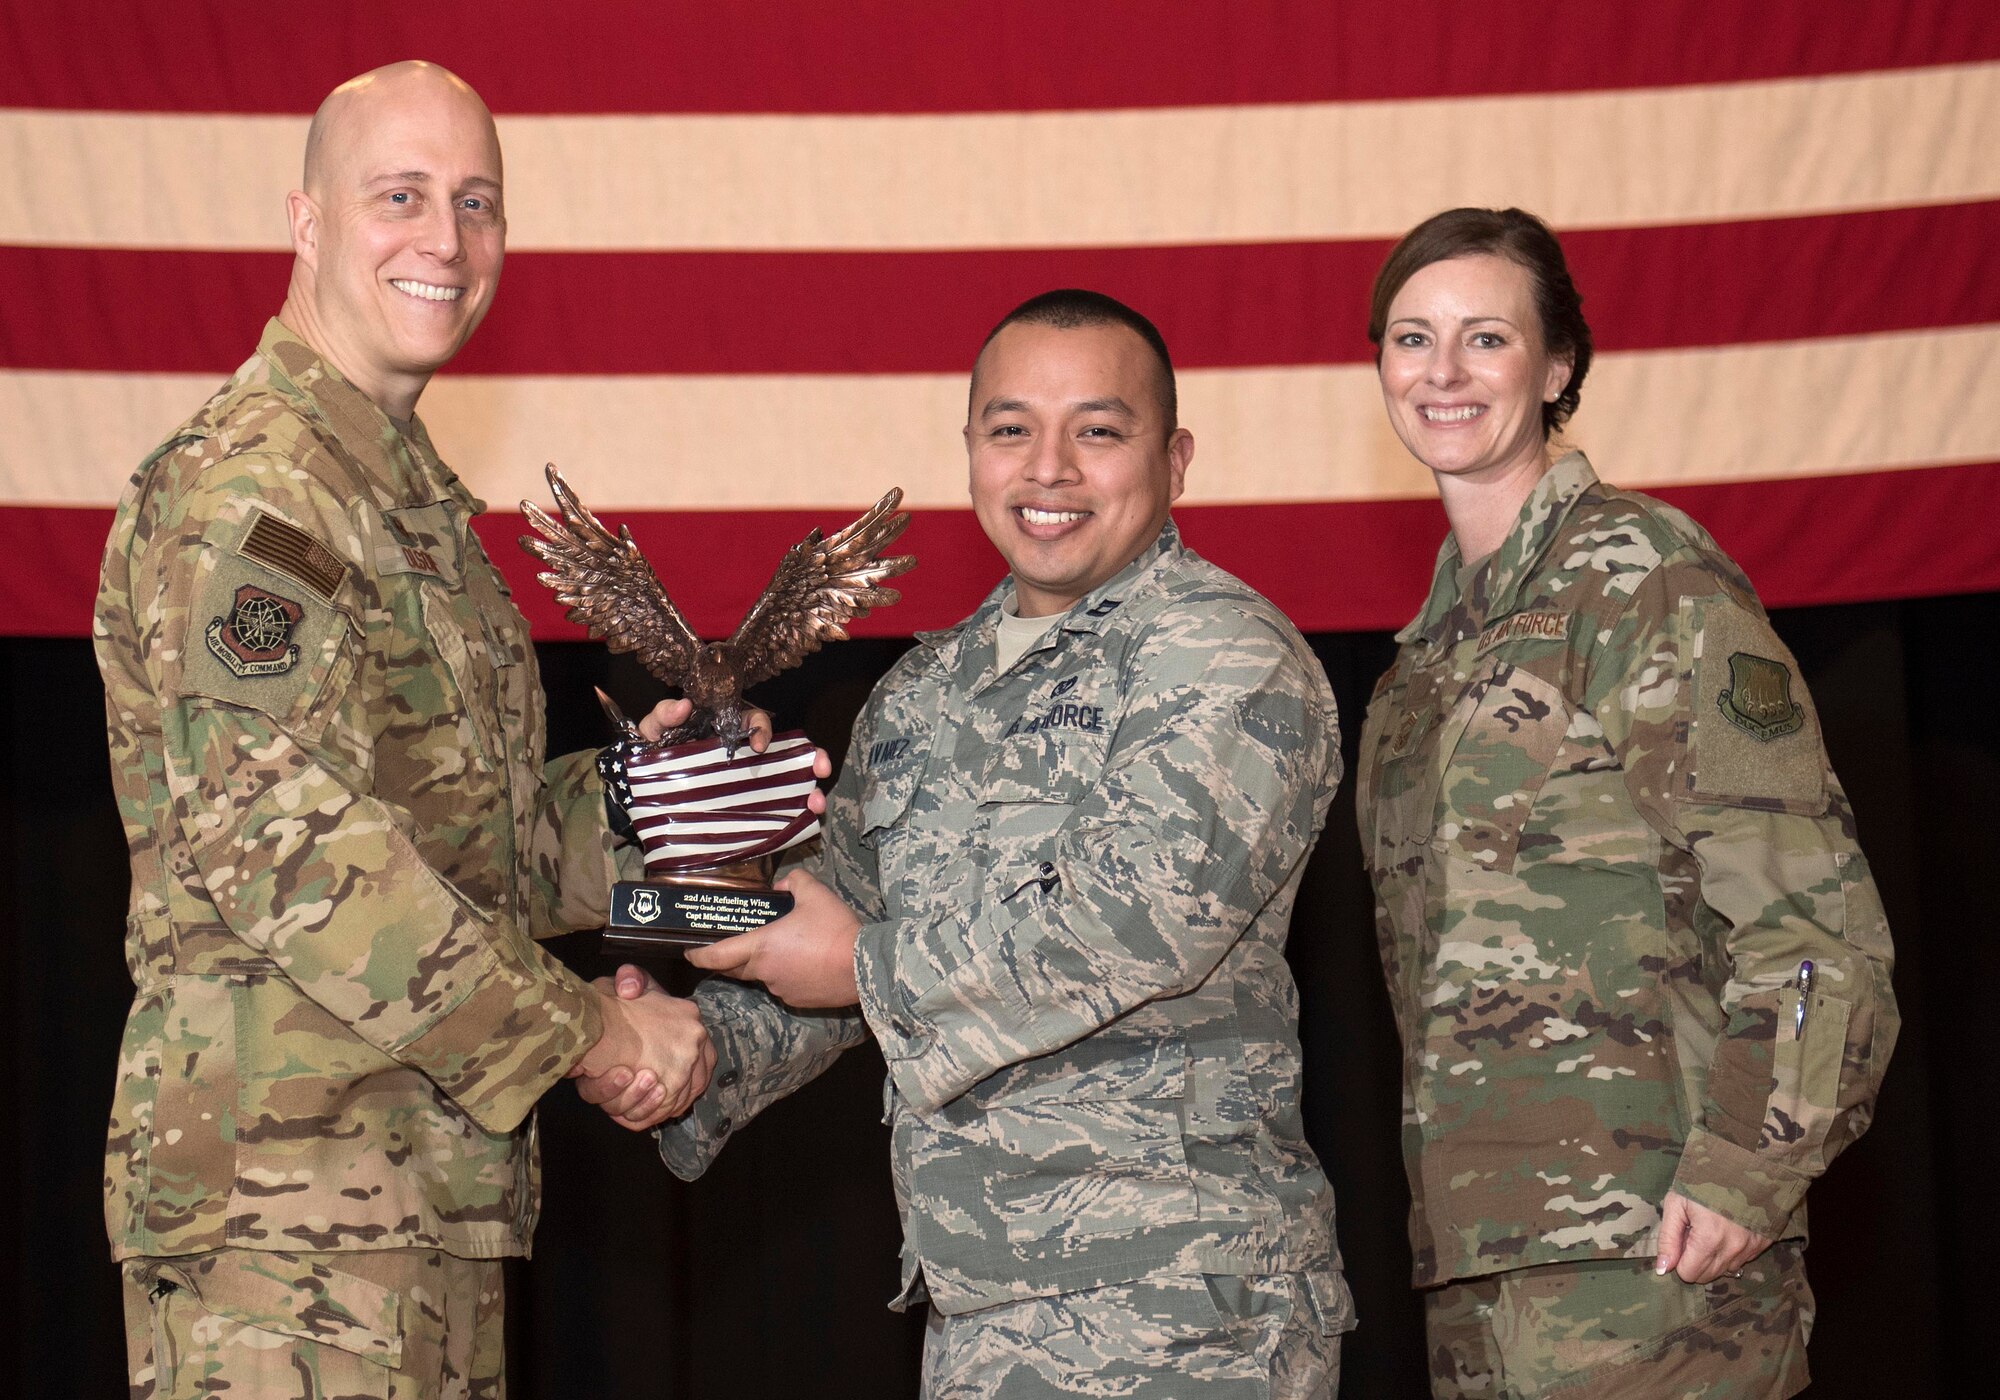 McConnell Air Force Base's 4th Quarter Award Winners at McConnell AFB, Kan., Jan. 30, 2019. Members not present are not pictured. (U.S. Air Force photo by Staff Sgt. David Bernal Del Agua)